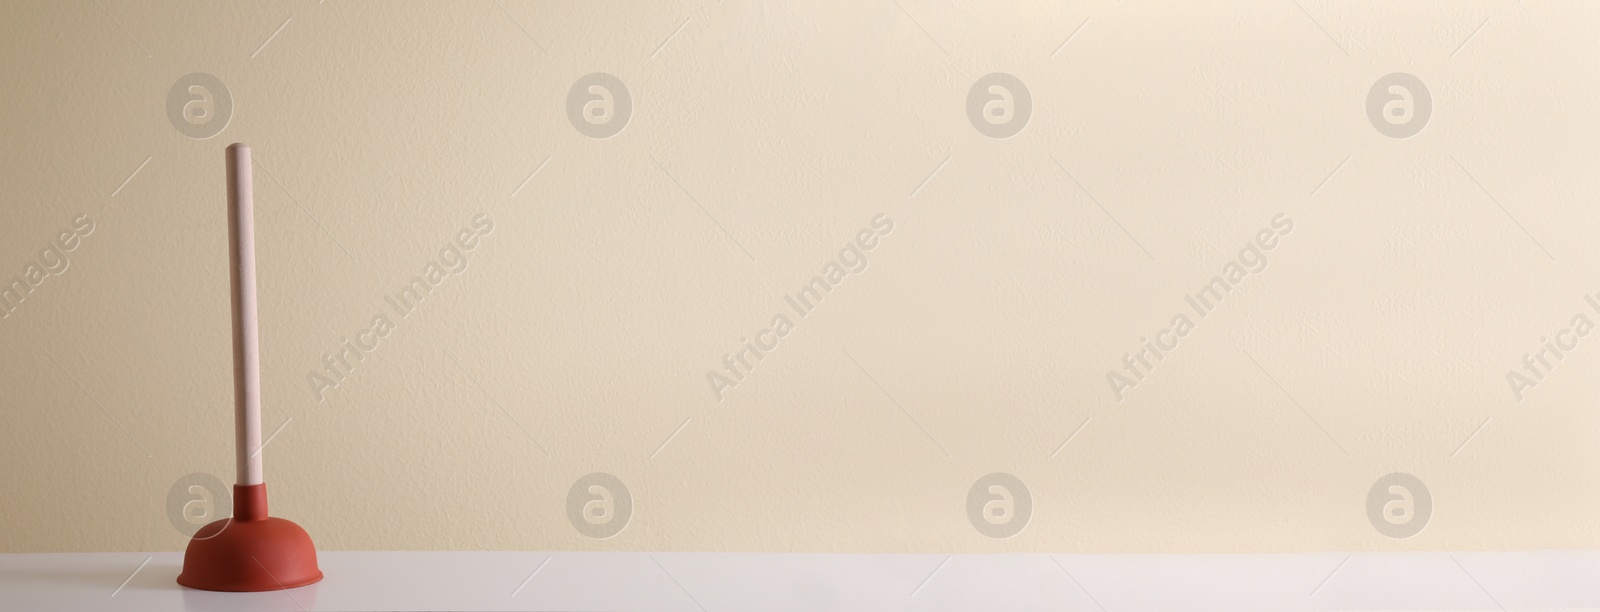 Photo of Plunger on white table against beige background. Space for text